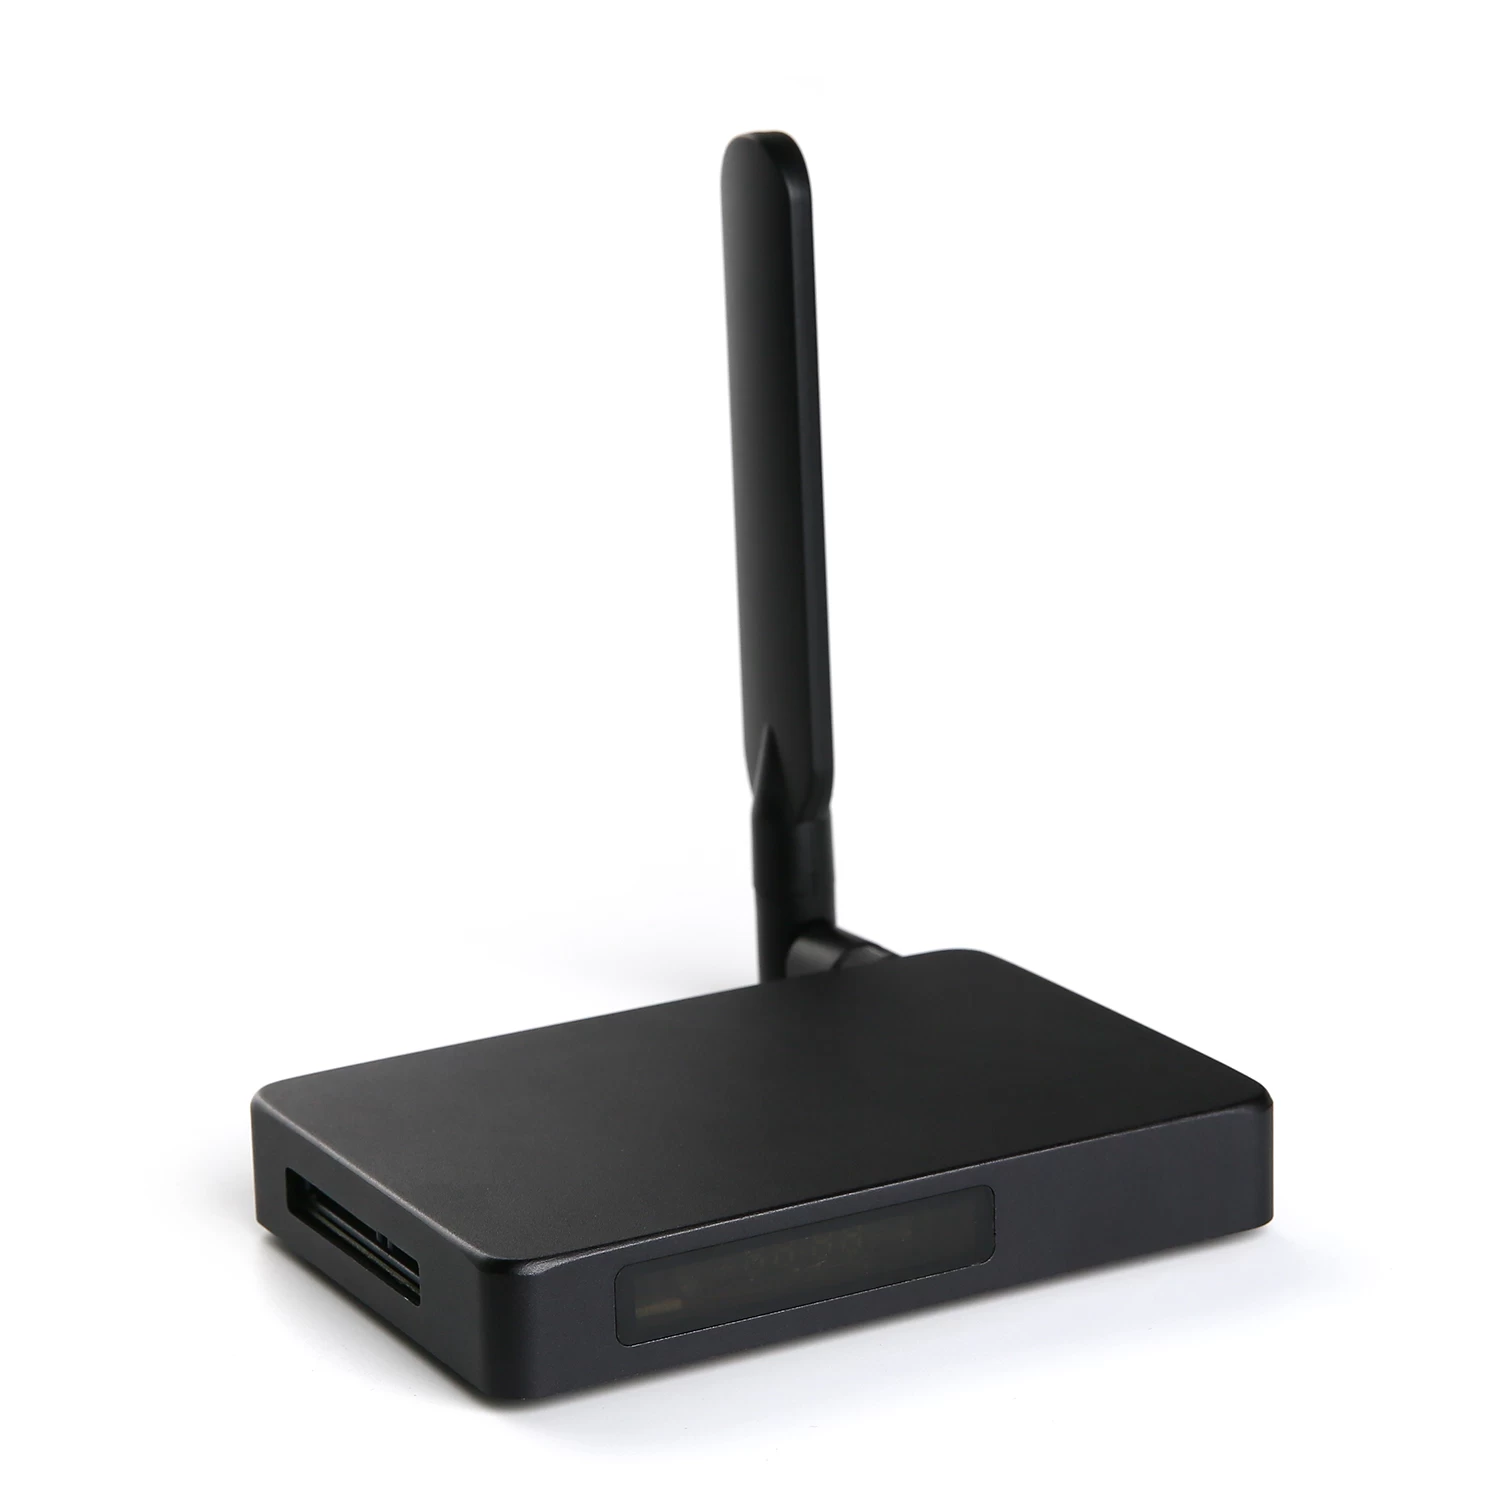 Android Tv Box solution provider, Android TV Box Custom, Android TV Box support LED/LCD